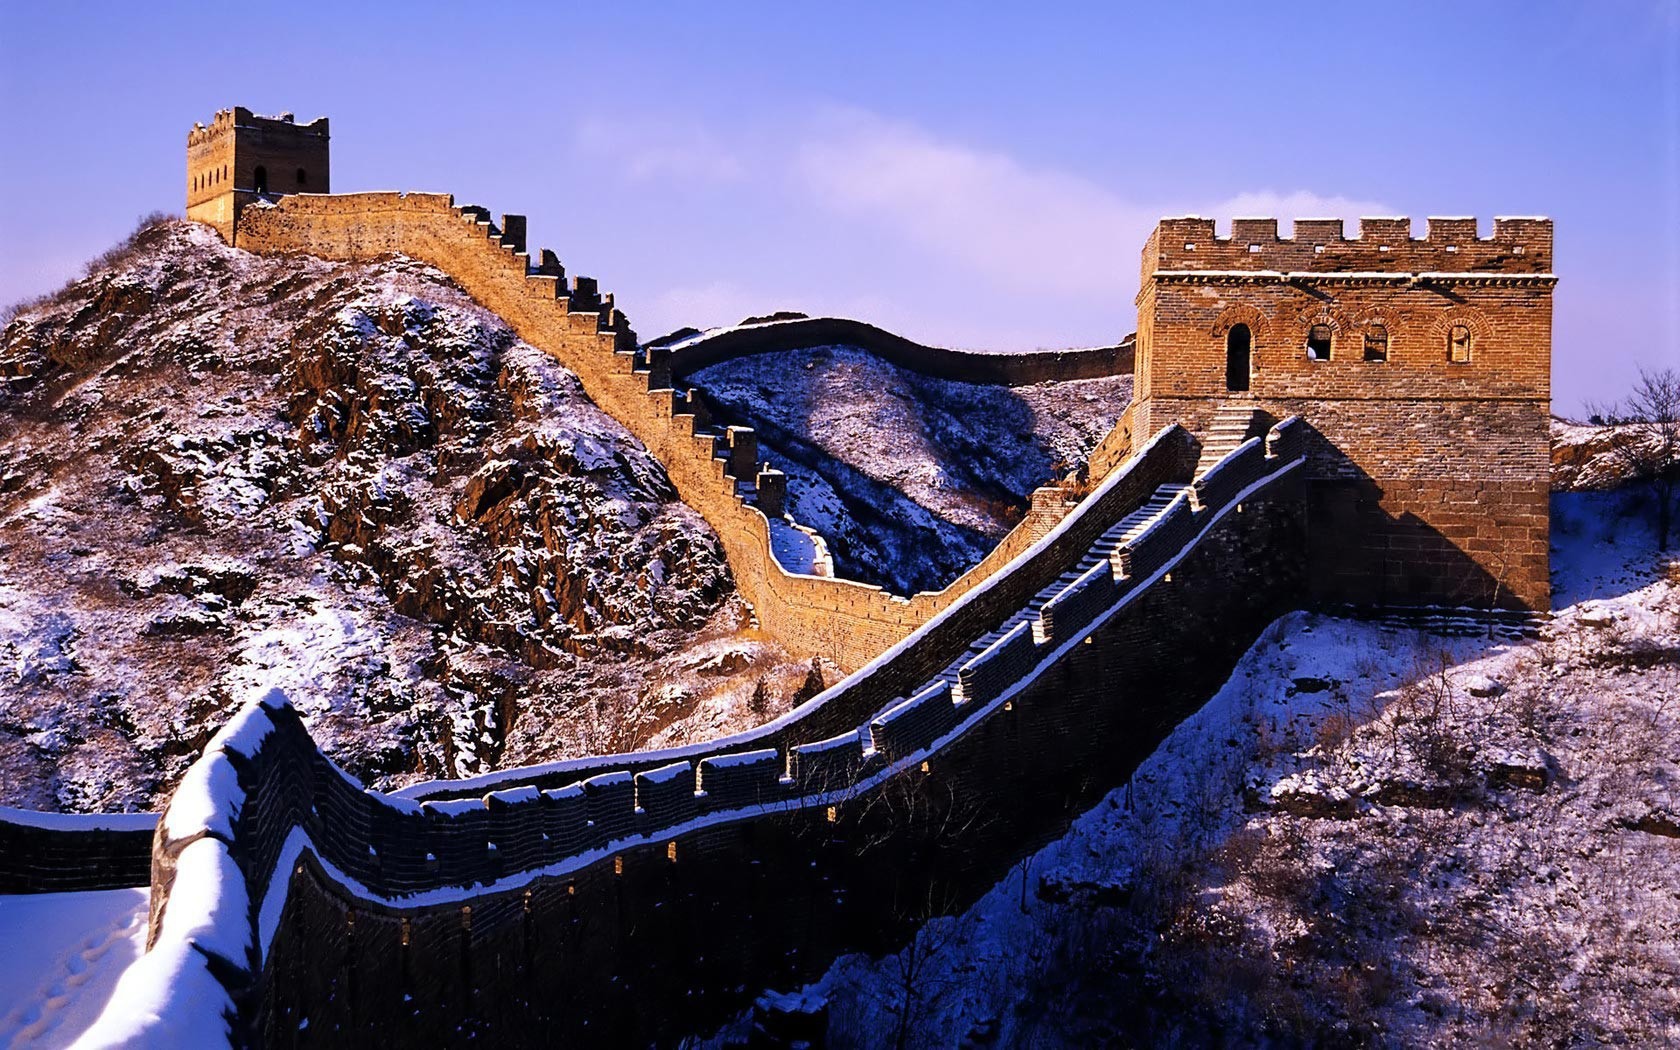 Chinese Wall covered with snow